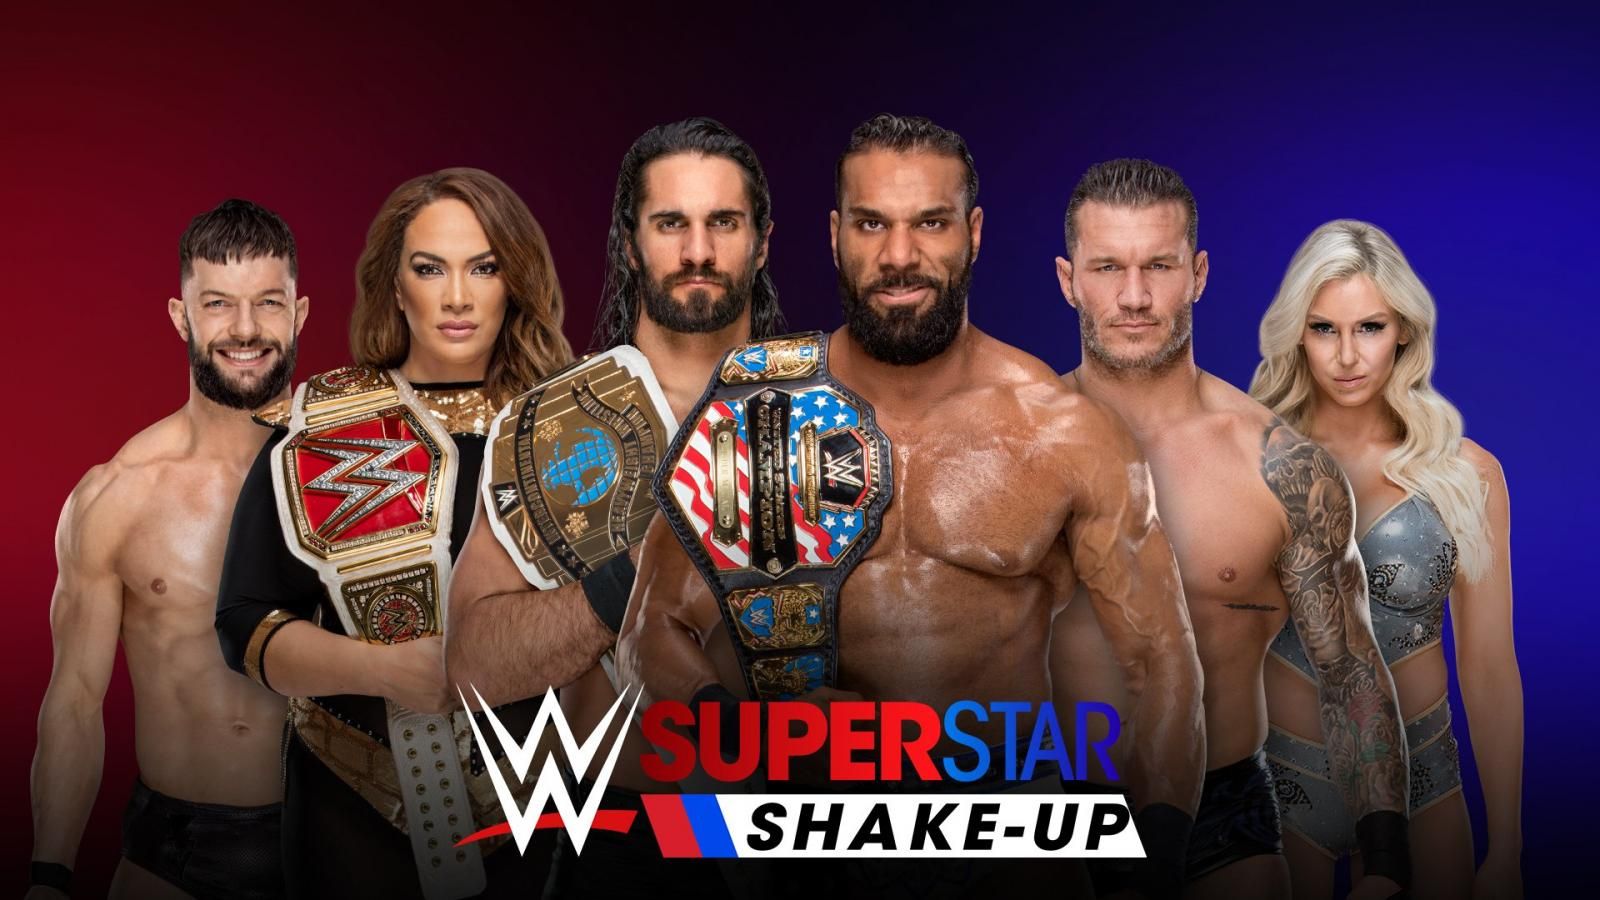 WWE Superstar Shakeup Who Moved to RAW and SmackDown Live?